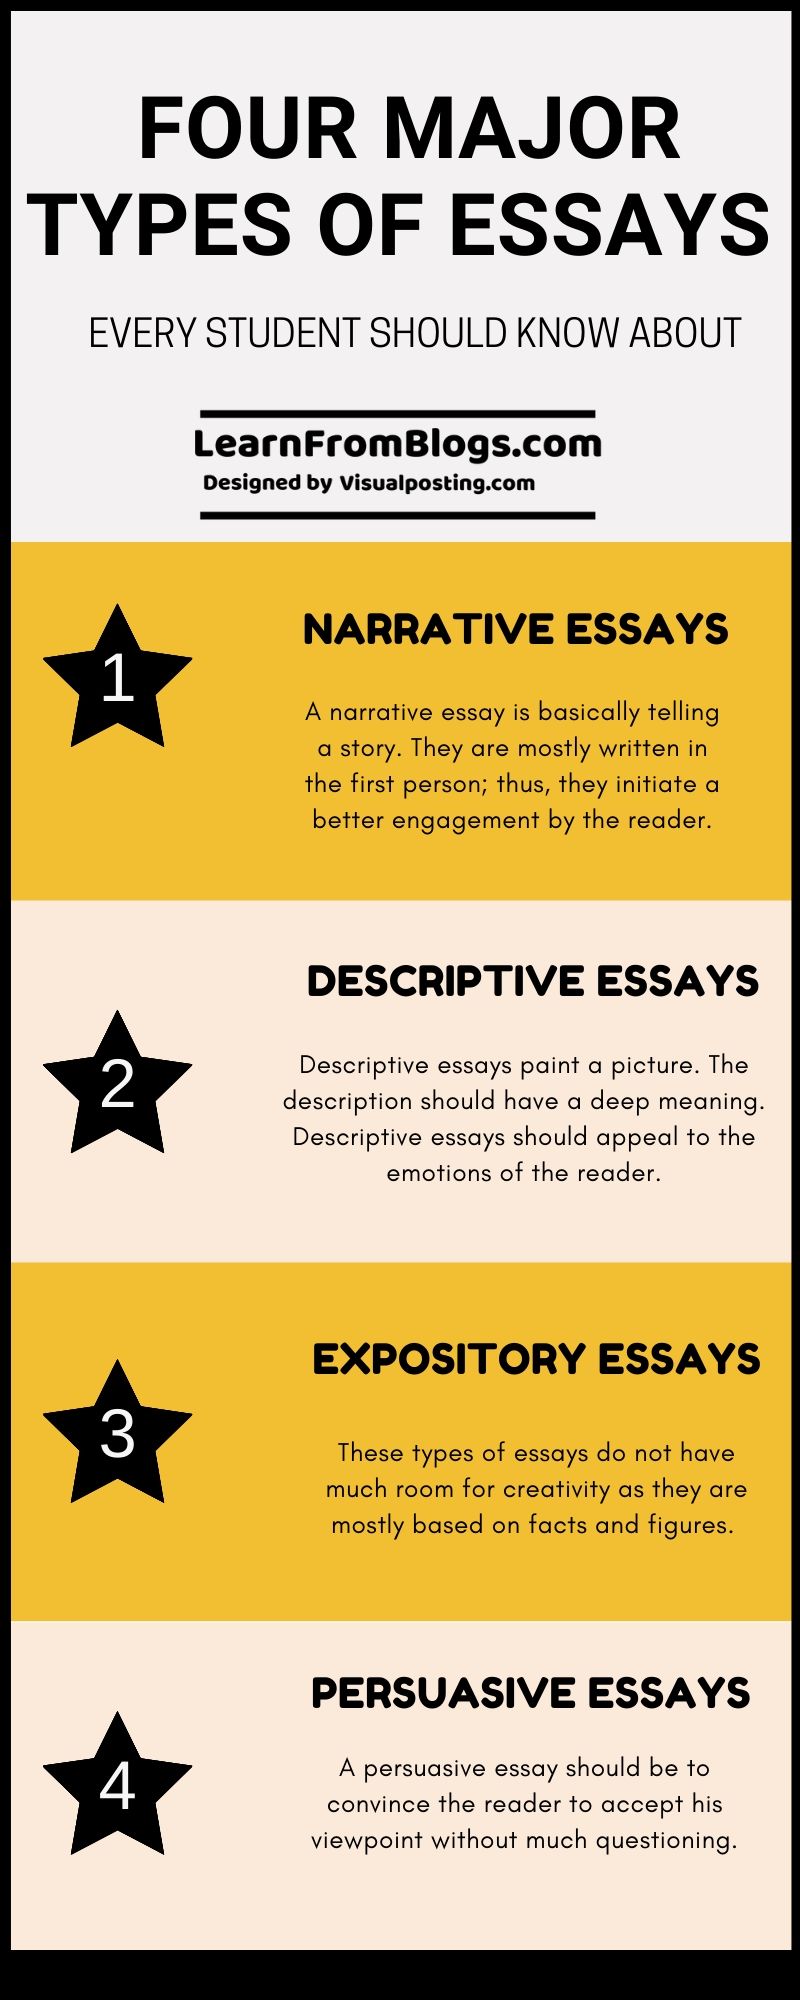 how are a persuasive essay and an expository essay different